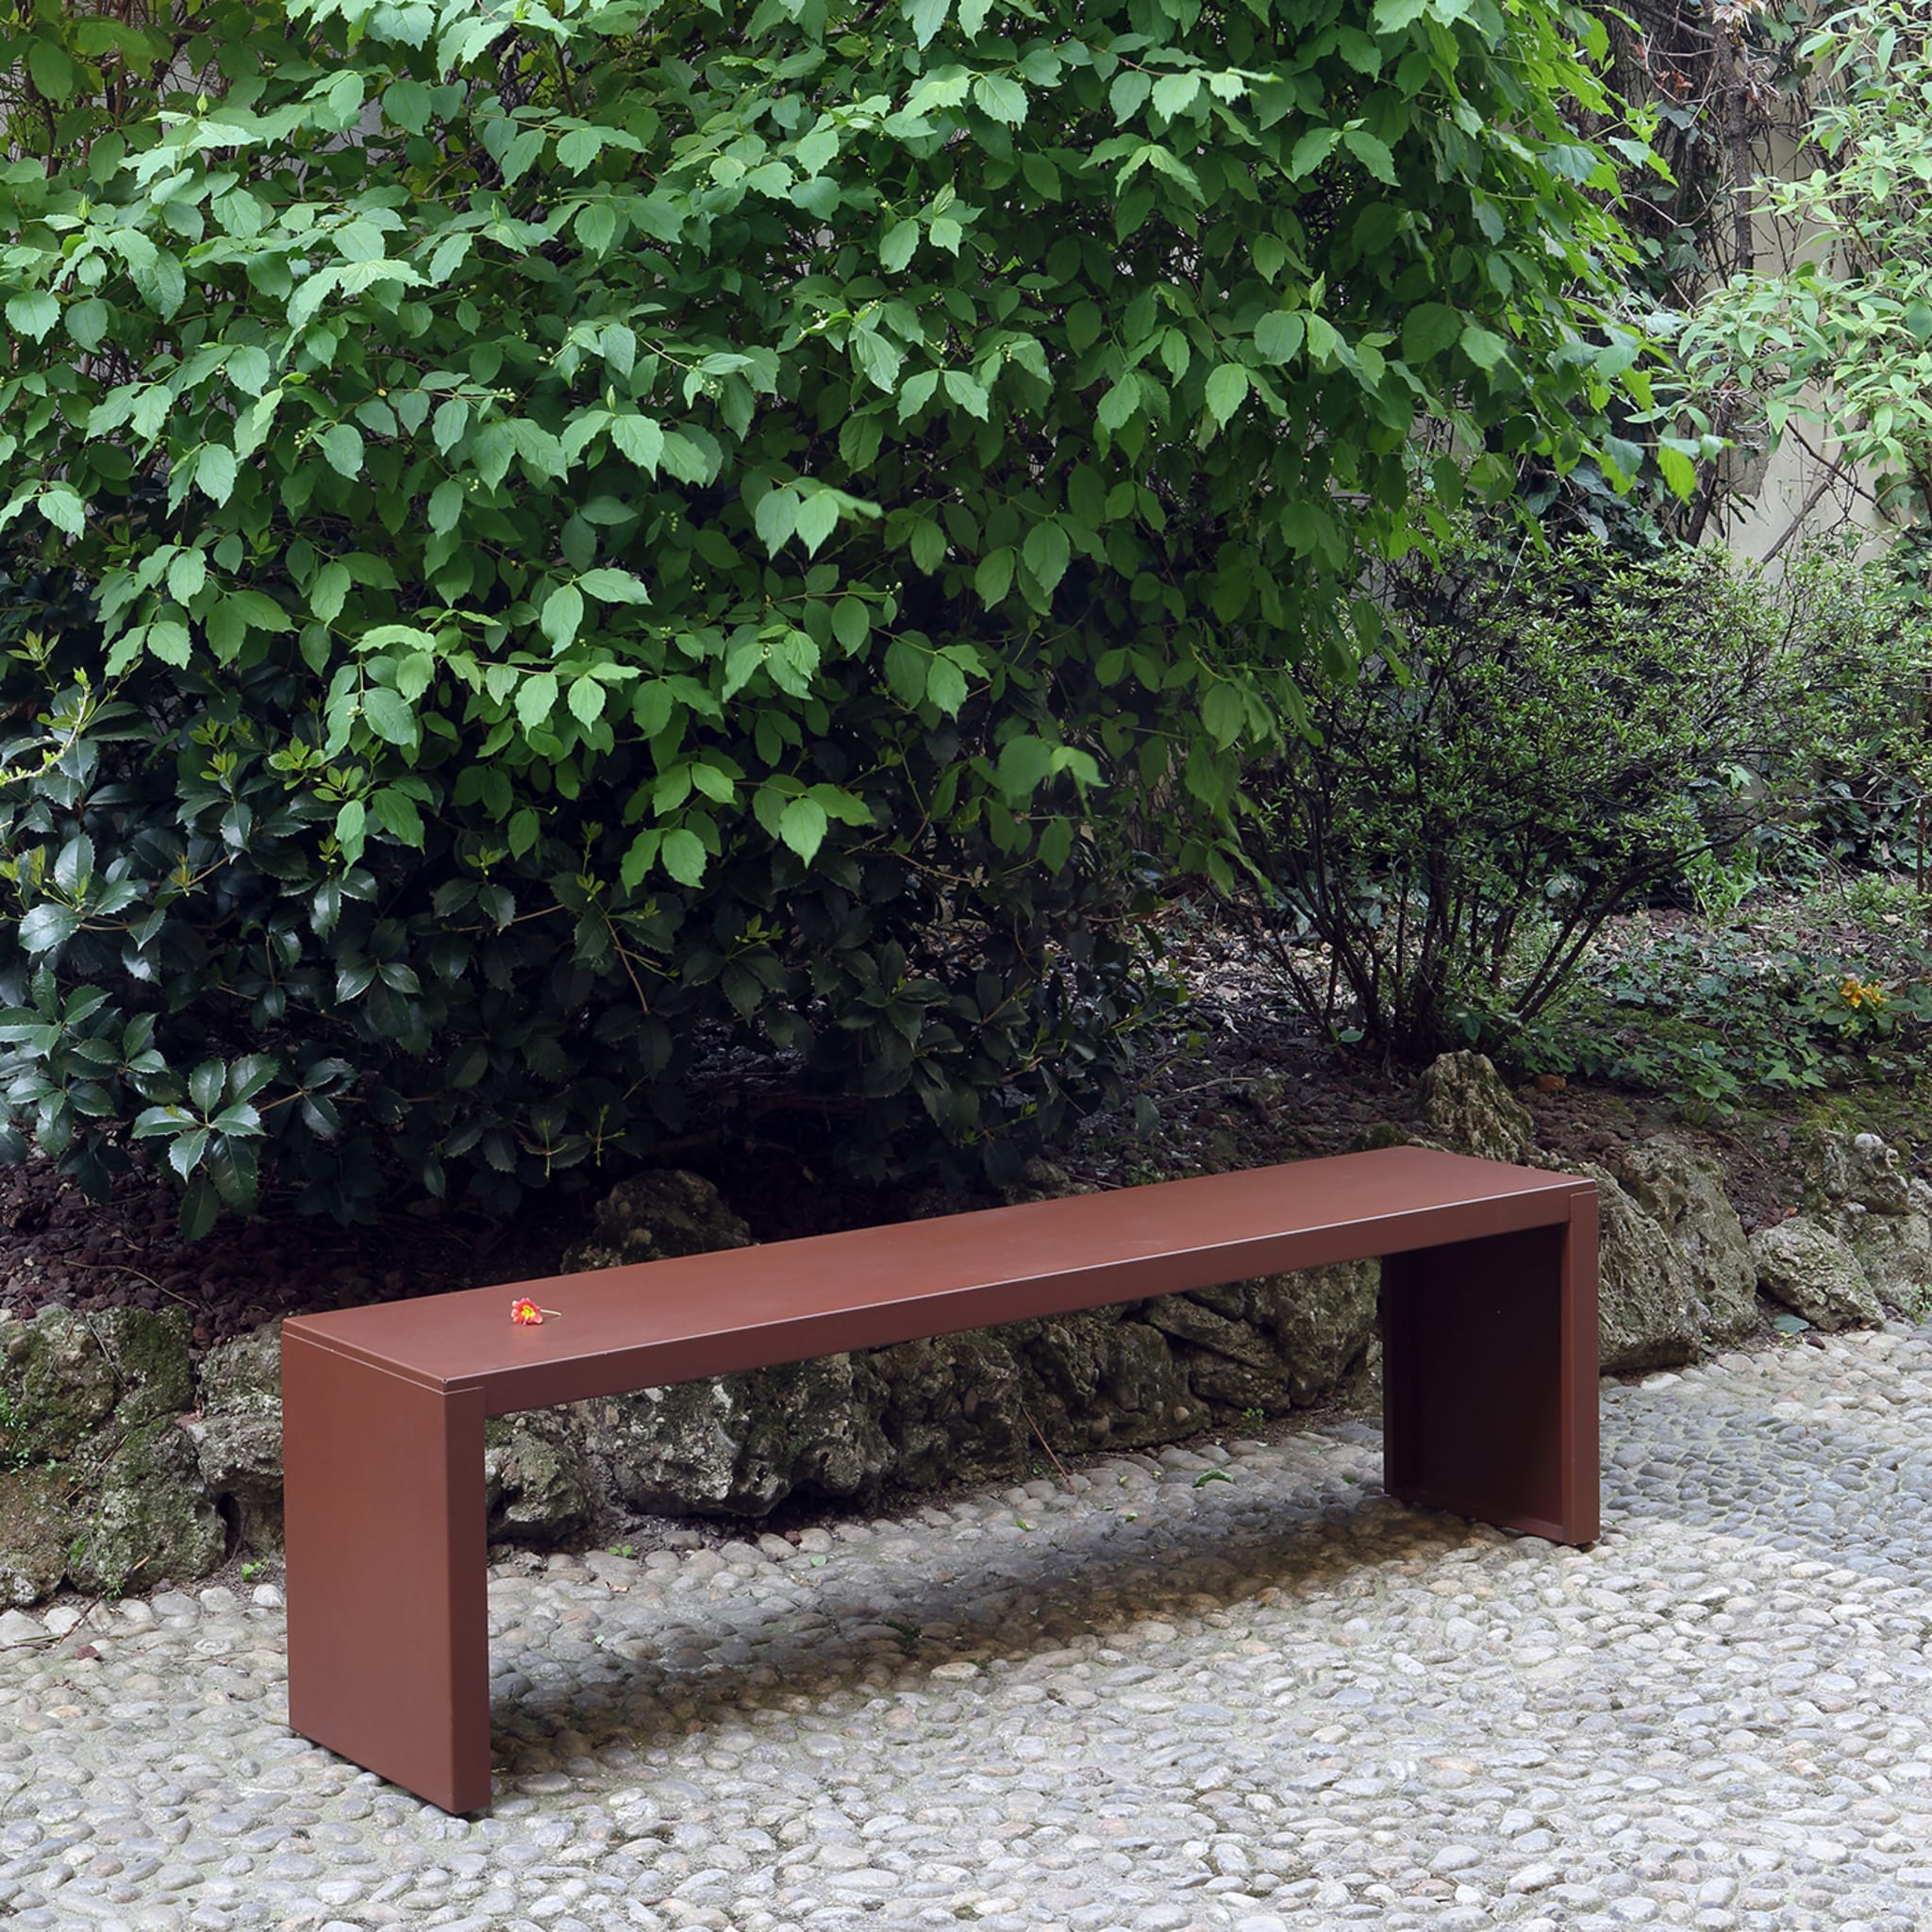 Big Irony Brown Outdoor Bench by Maurizio Peregalli - Alternative view 1